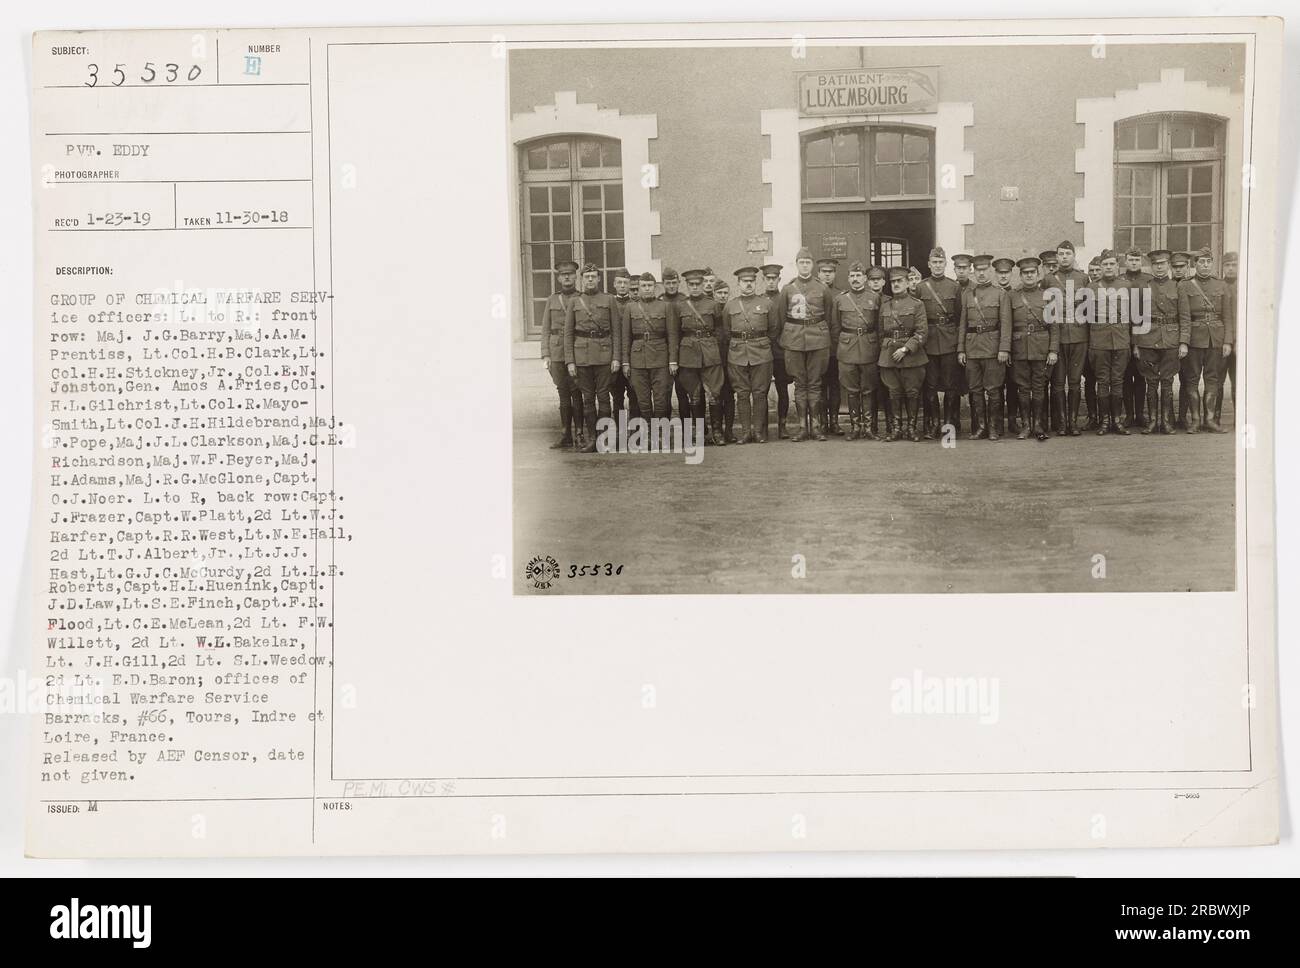 Group of Chemical Warfare Service officers posing in front of the offices of Chemical Warfare Service Barracks, #66, Tours, Indre et Loire, France. Front row (left to right): Majors J.G. Barry, A.M. Prentiss, Lt. Cols. H.B. Clark, H.H. Stickney Jr., E.N. Jonston, Gen. Amos A. Pries, Col. H.L. Gilchrist, Lt. Cols. R.Mayo-Smith, J.H. Hildebrand and several more. Captions on back row were not visible in the image. Released by AEF Censor, date not given. Stock Photo